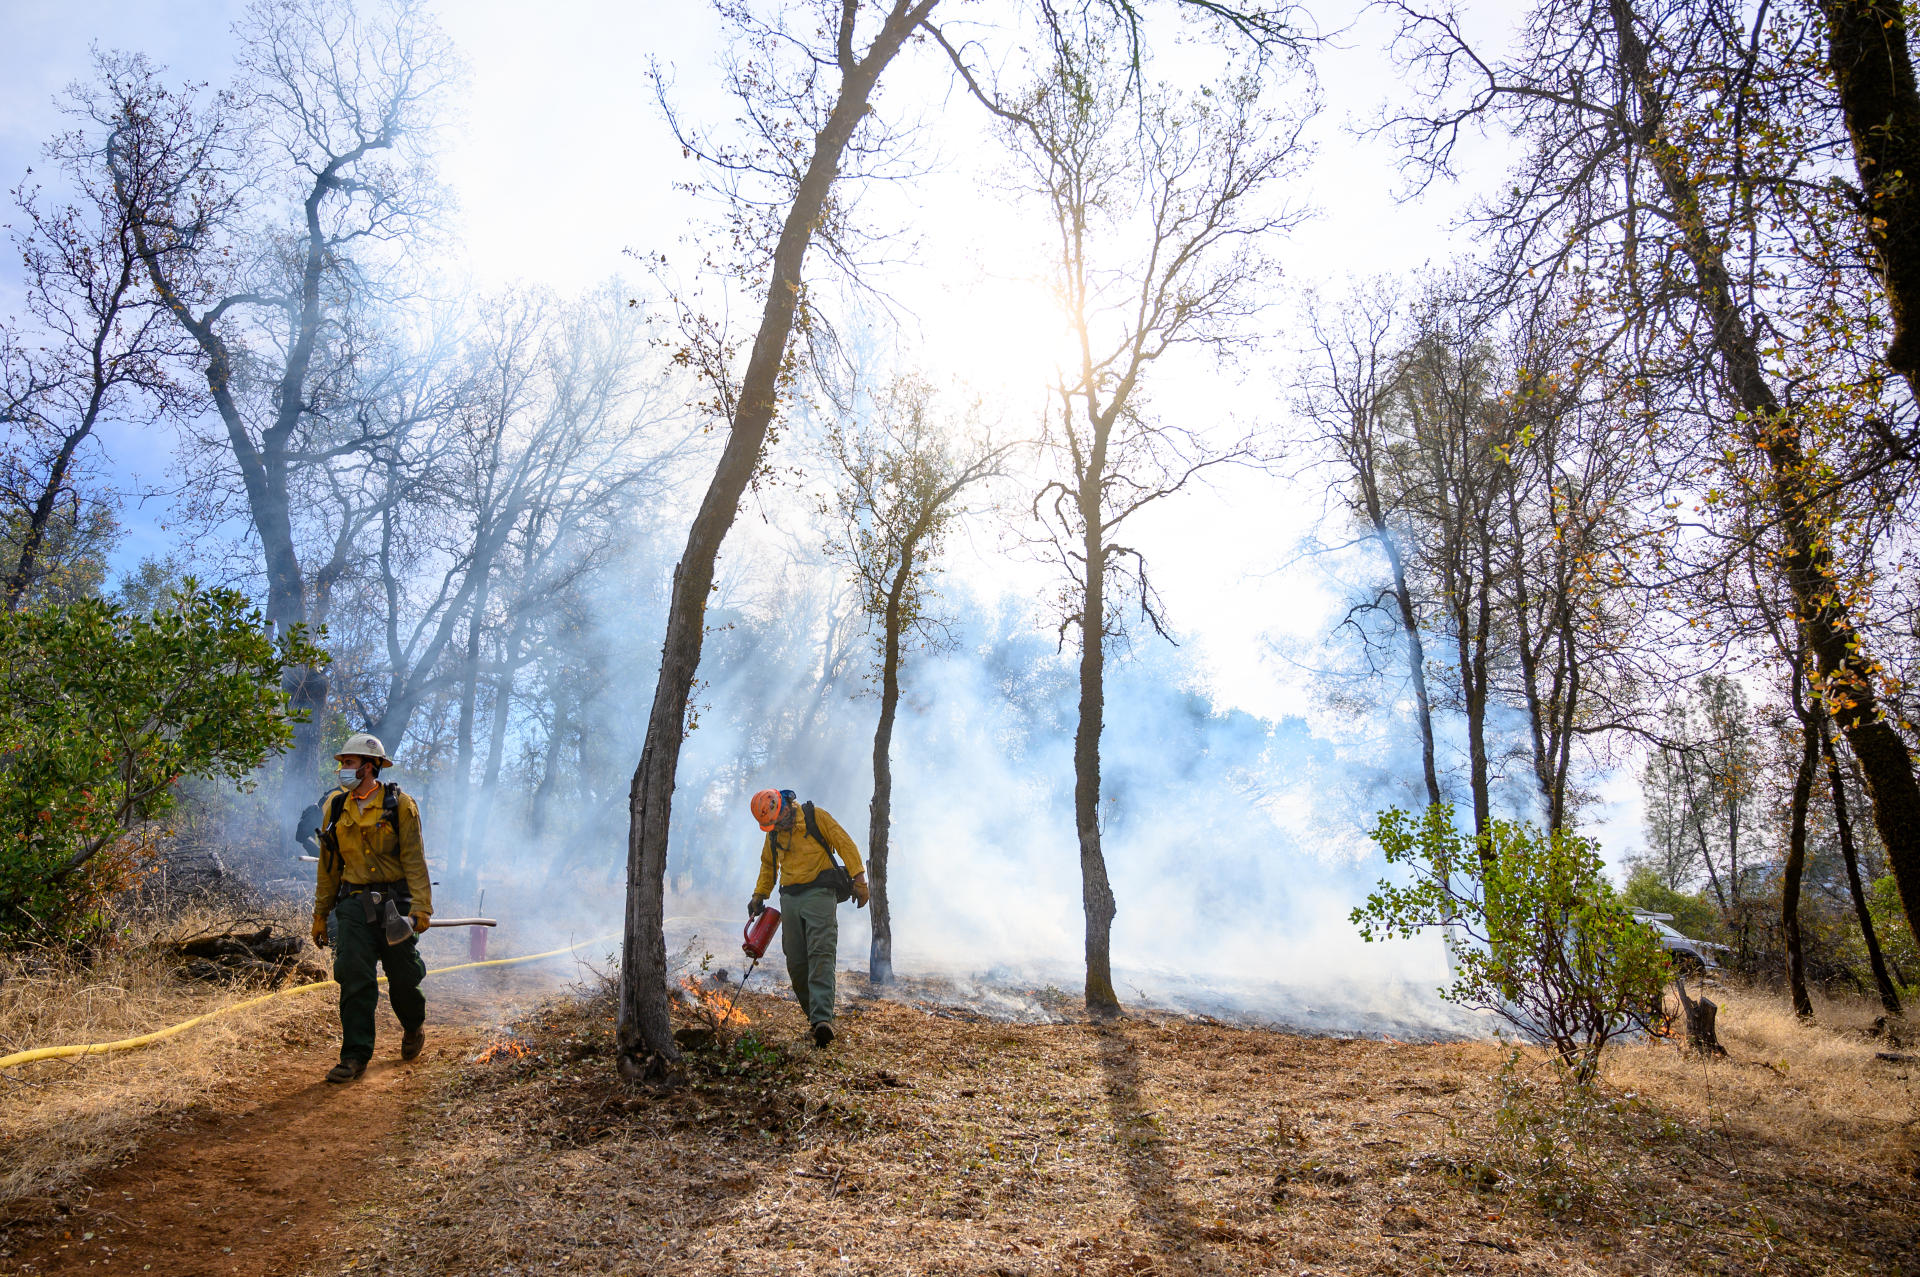 Smoke fills the air as a prescribed burn takes place